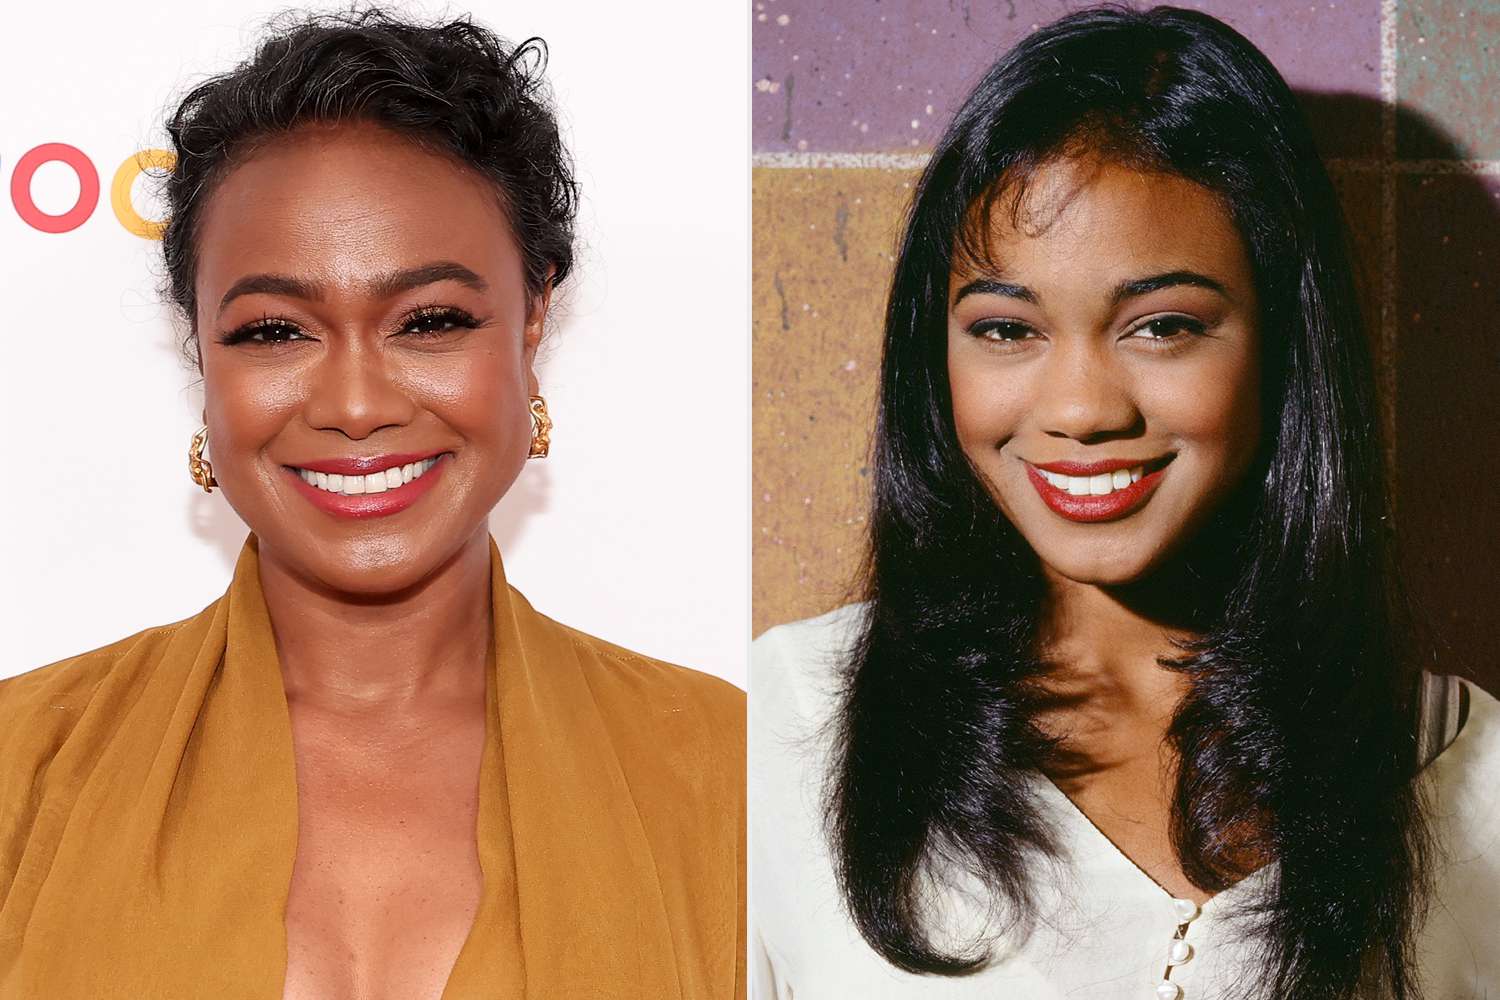 Tatyana Ali 'Bawled' After Filming with Actress Playing Her “Fresh Prince” Character: 'Heart Exploded' (Exclusive)